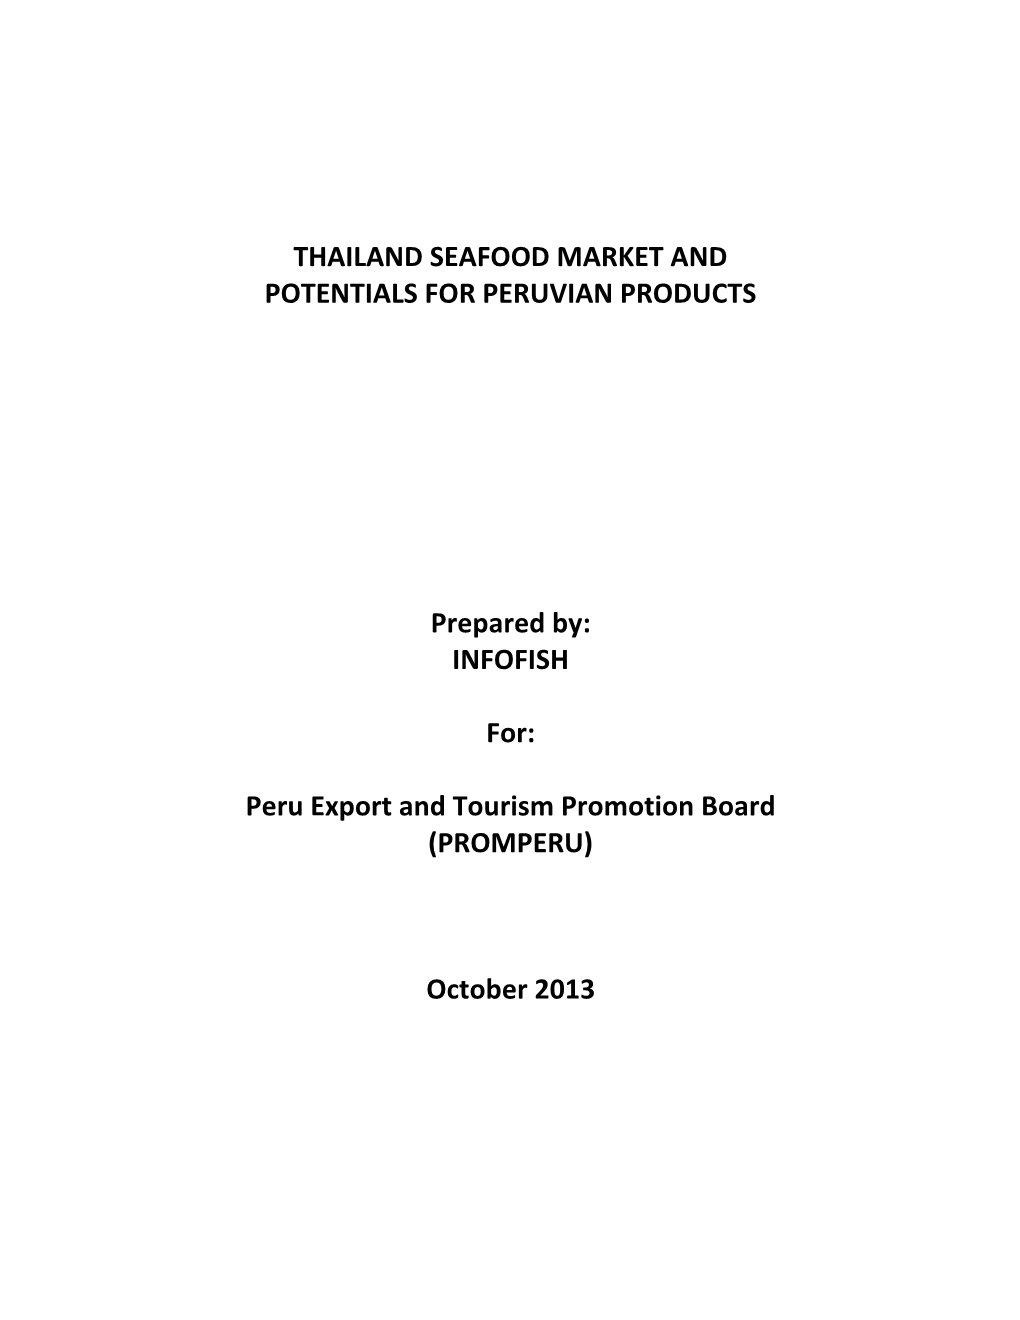 Thailand Seafood Market and Potentials for Peruvian Products